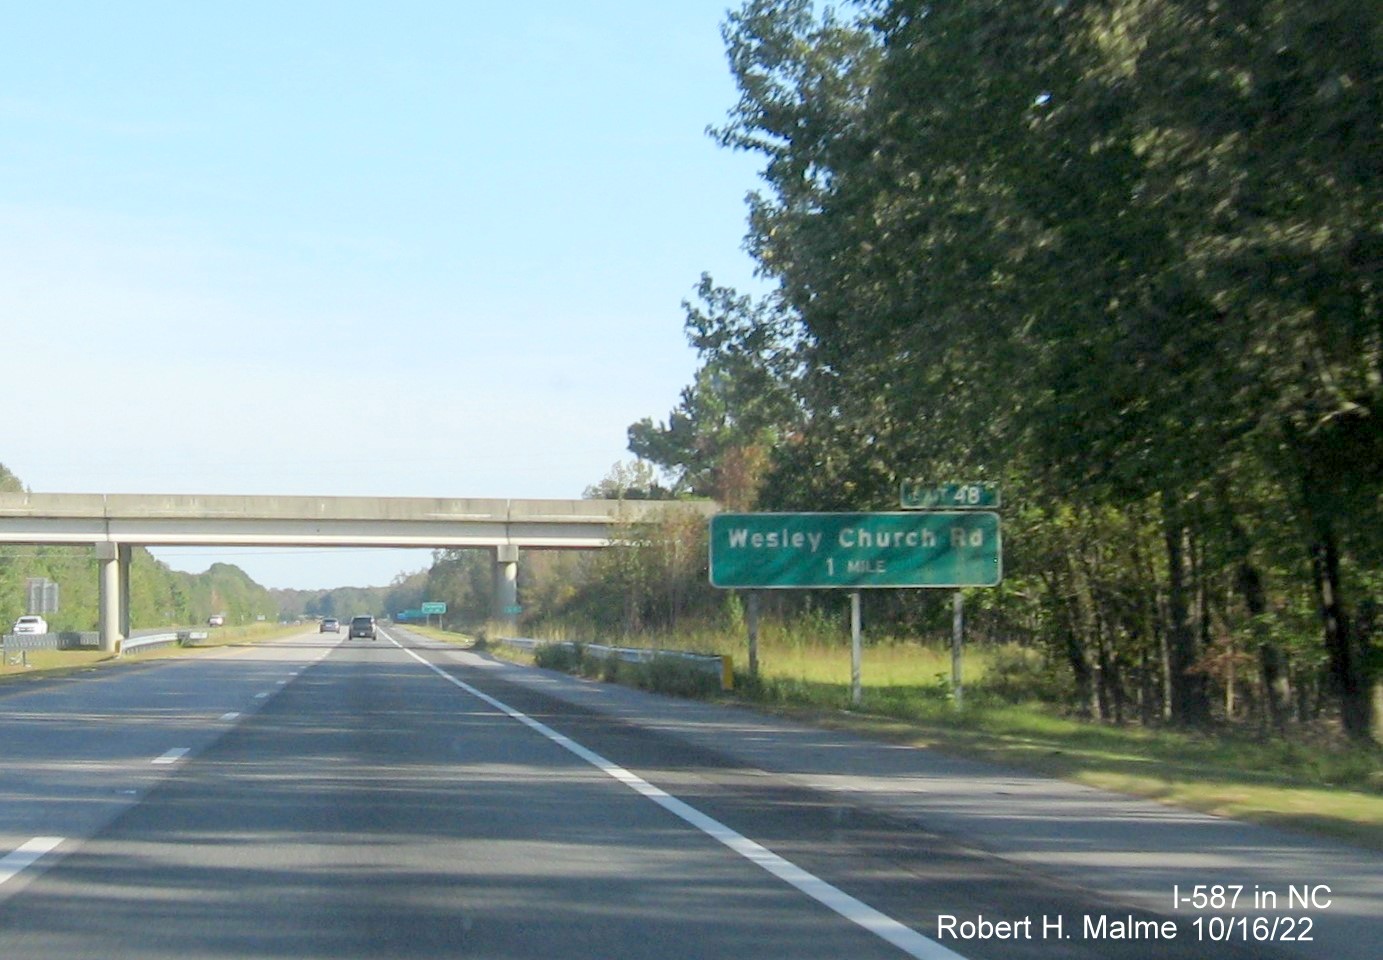 Image of 1 mile advance sign for Wesley Chapel Road (US 258 South) exit with new I-587 milepost exit number on I-587 East in Farmville, October 2022